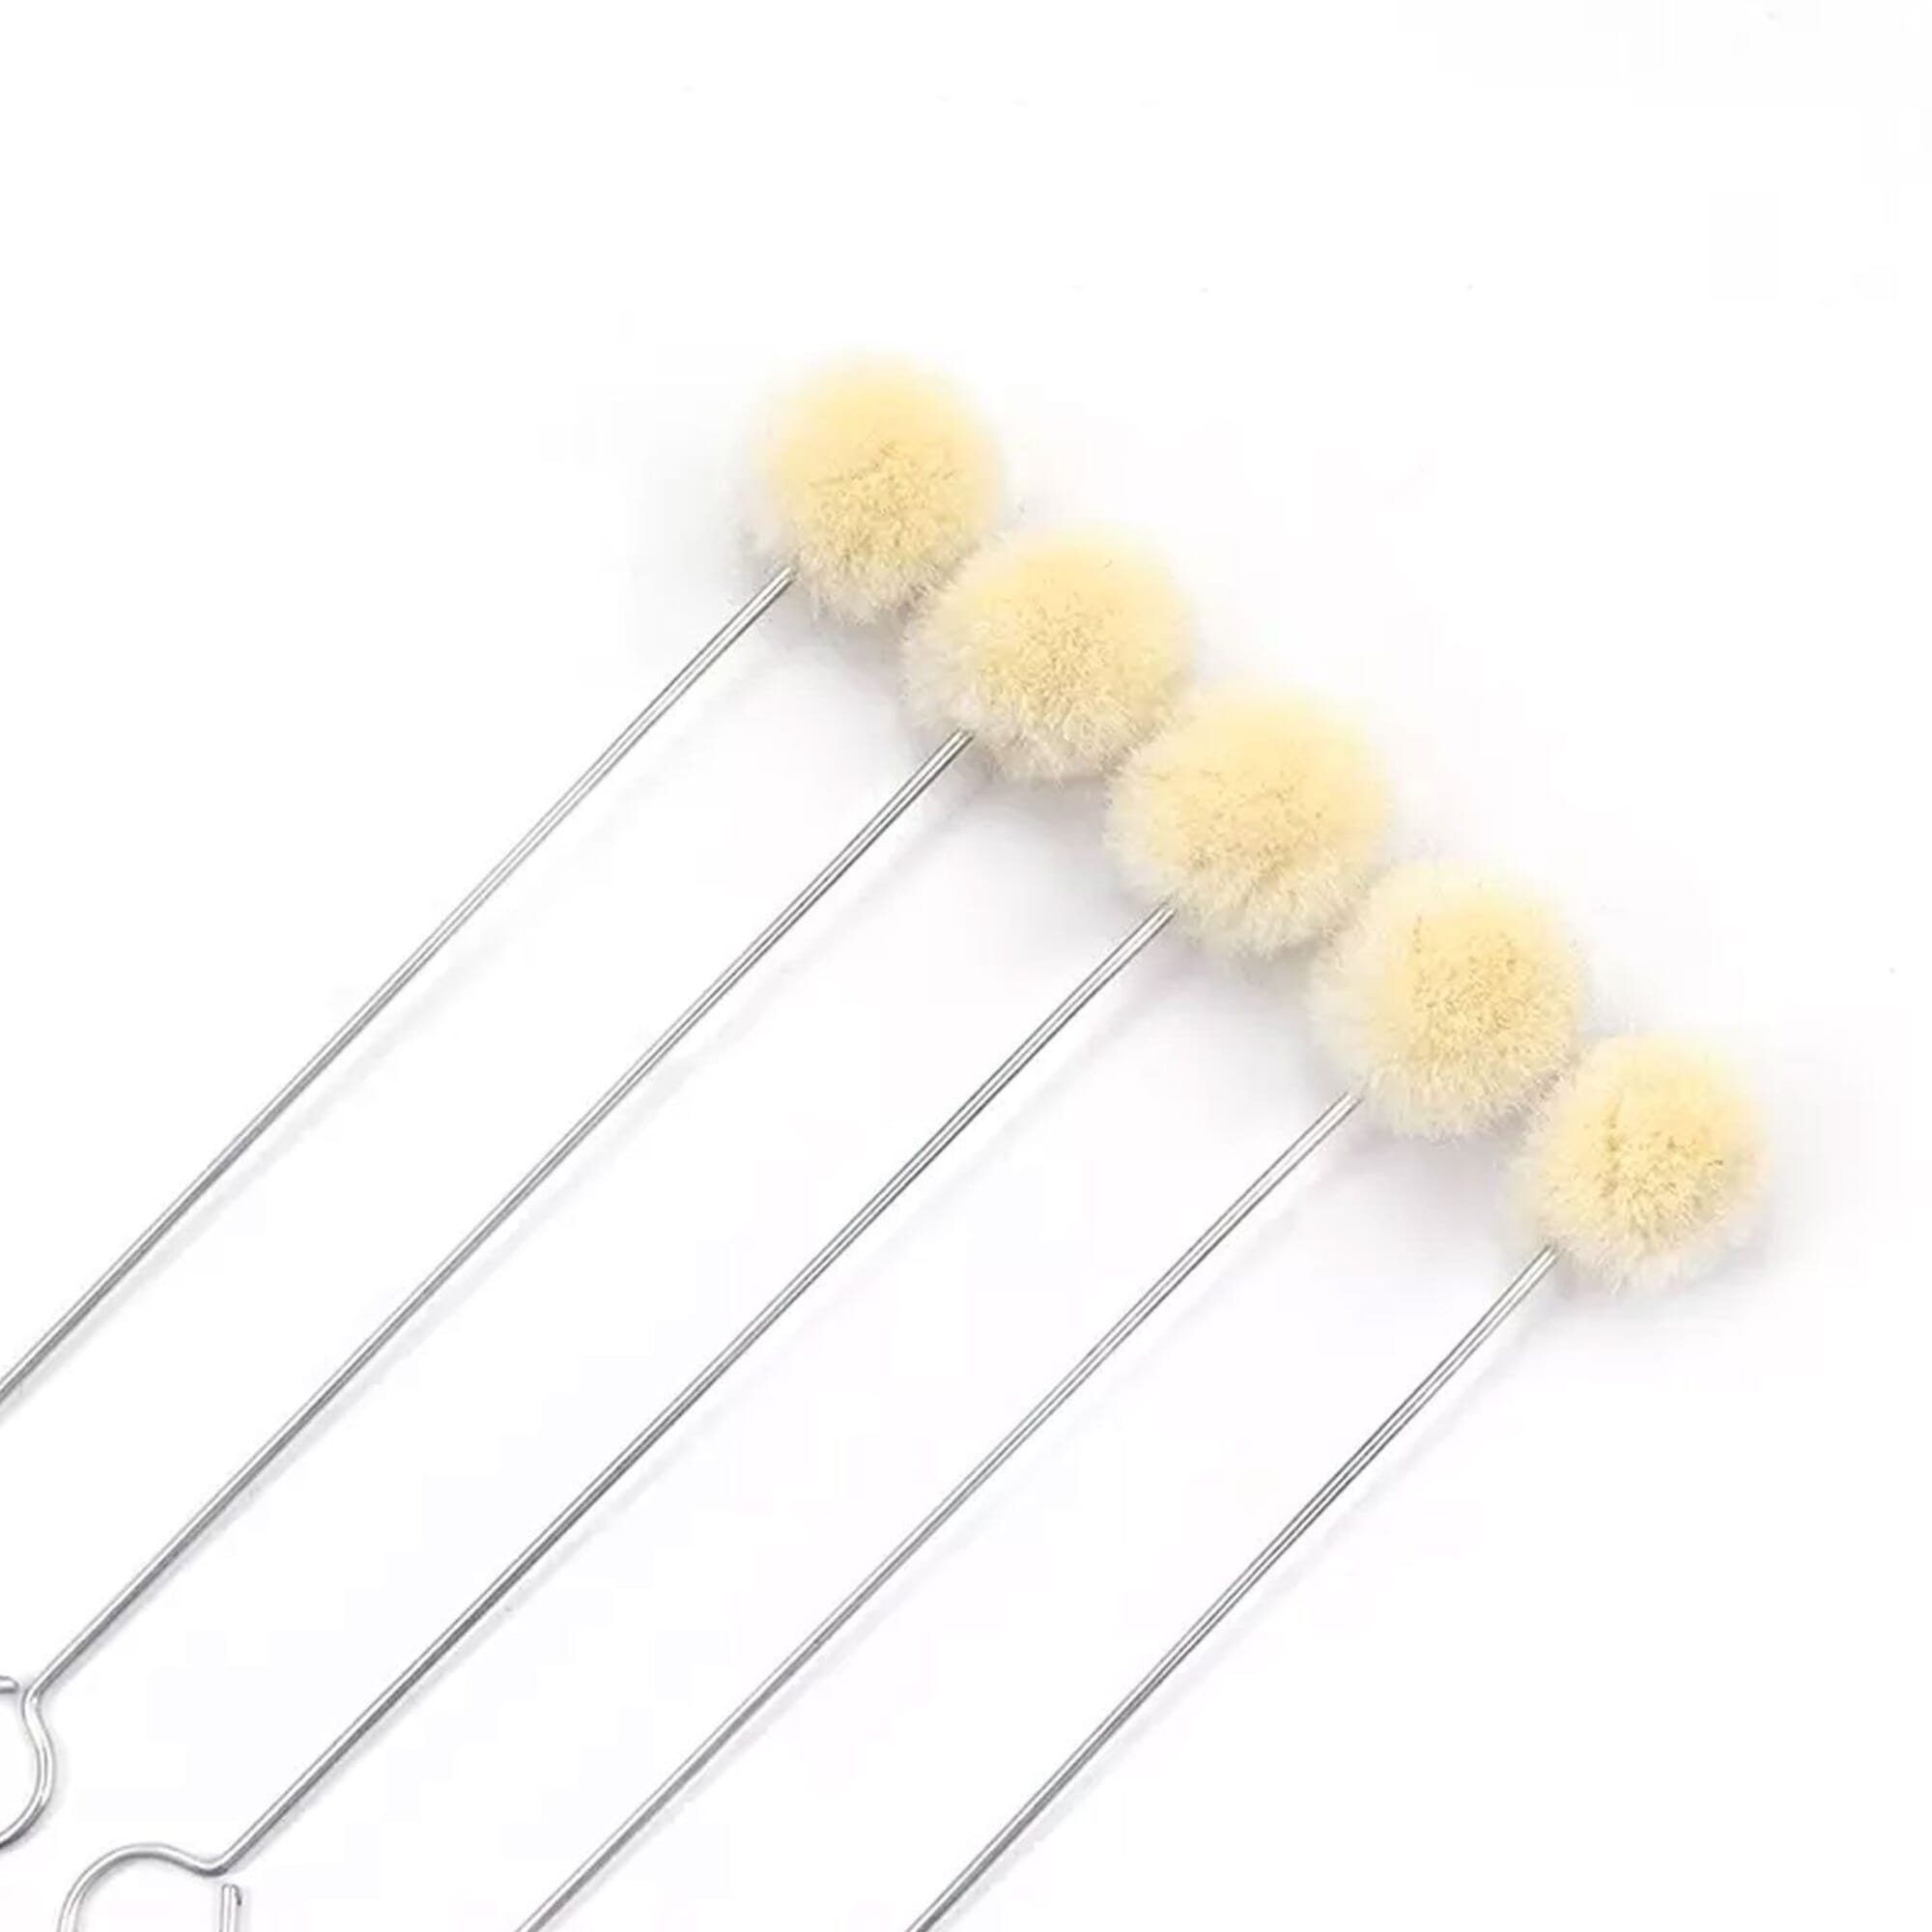 25 Pieces Wool Daubers Ball Brush Leather Dye Tool with Metal Handle  Applicator for DIY Crafts Projects 